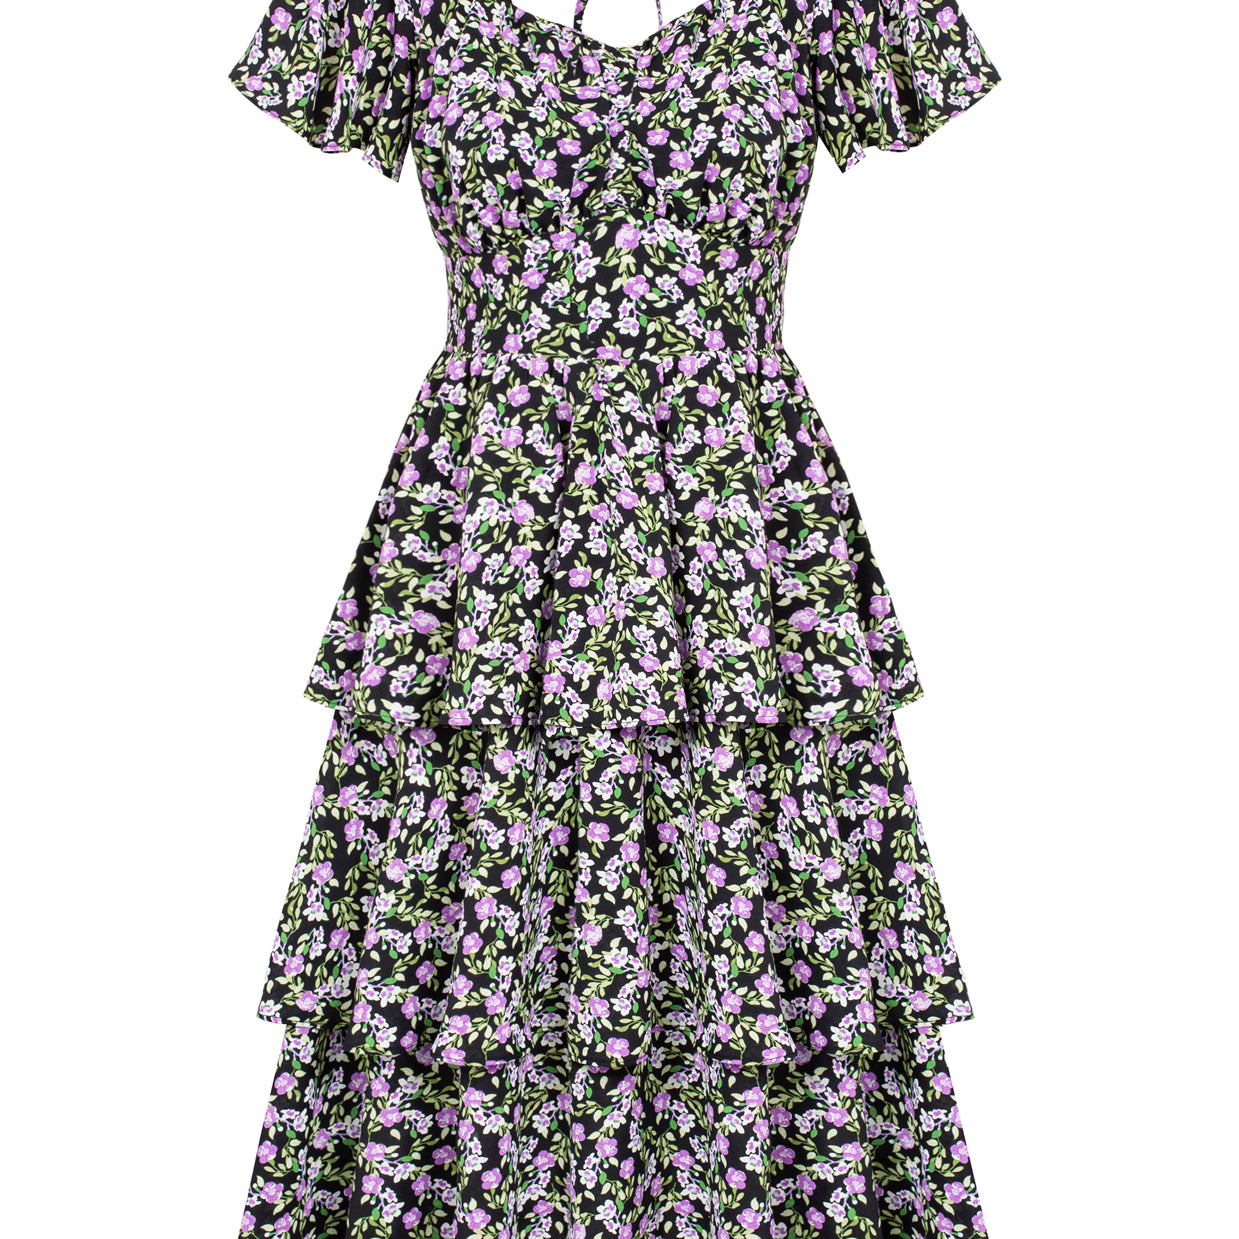 Floral Square Neck Tiered Ruffle Dress 2023 Summer Vintage A-line Swing Midi Dress